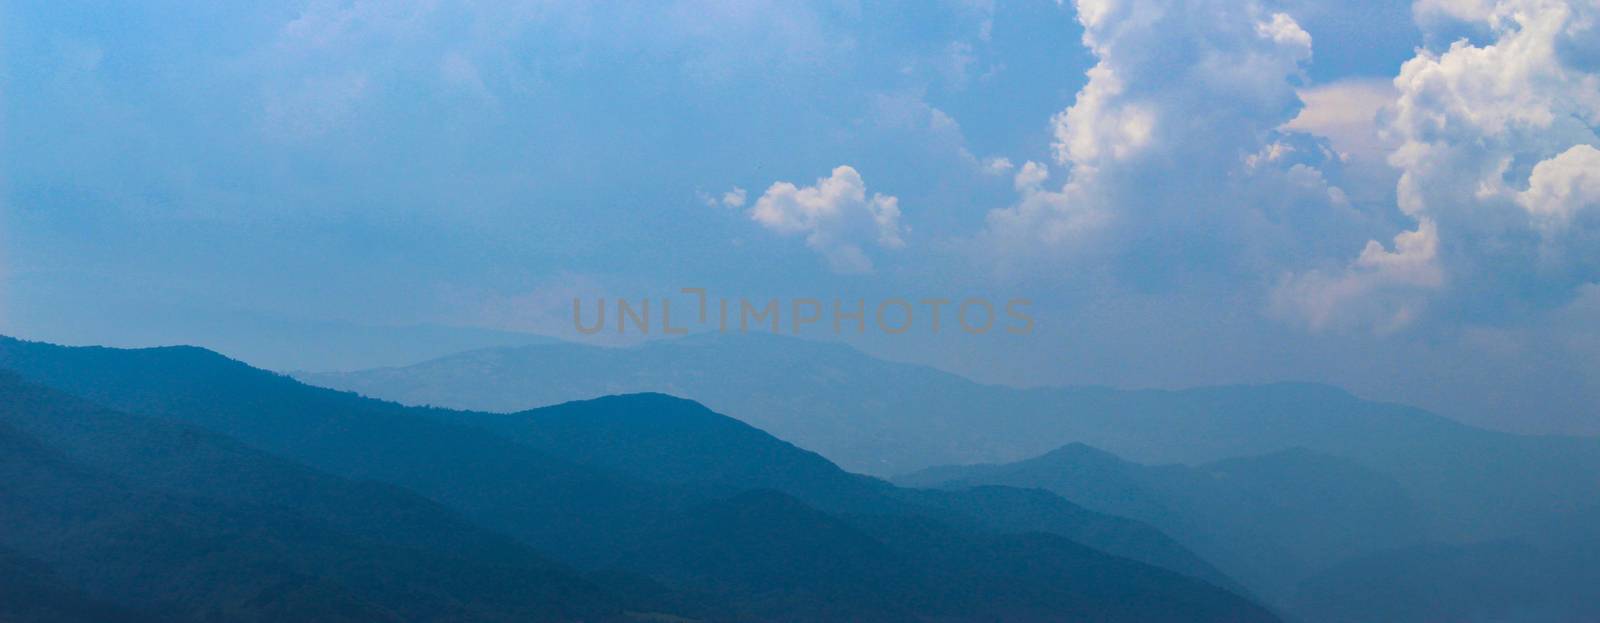 Banner of blue silhouettes of mountains in the distance, with clouds in the blue sky. Mountains and hills in the distance. Bosnia and Herzegovina.